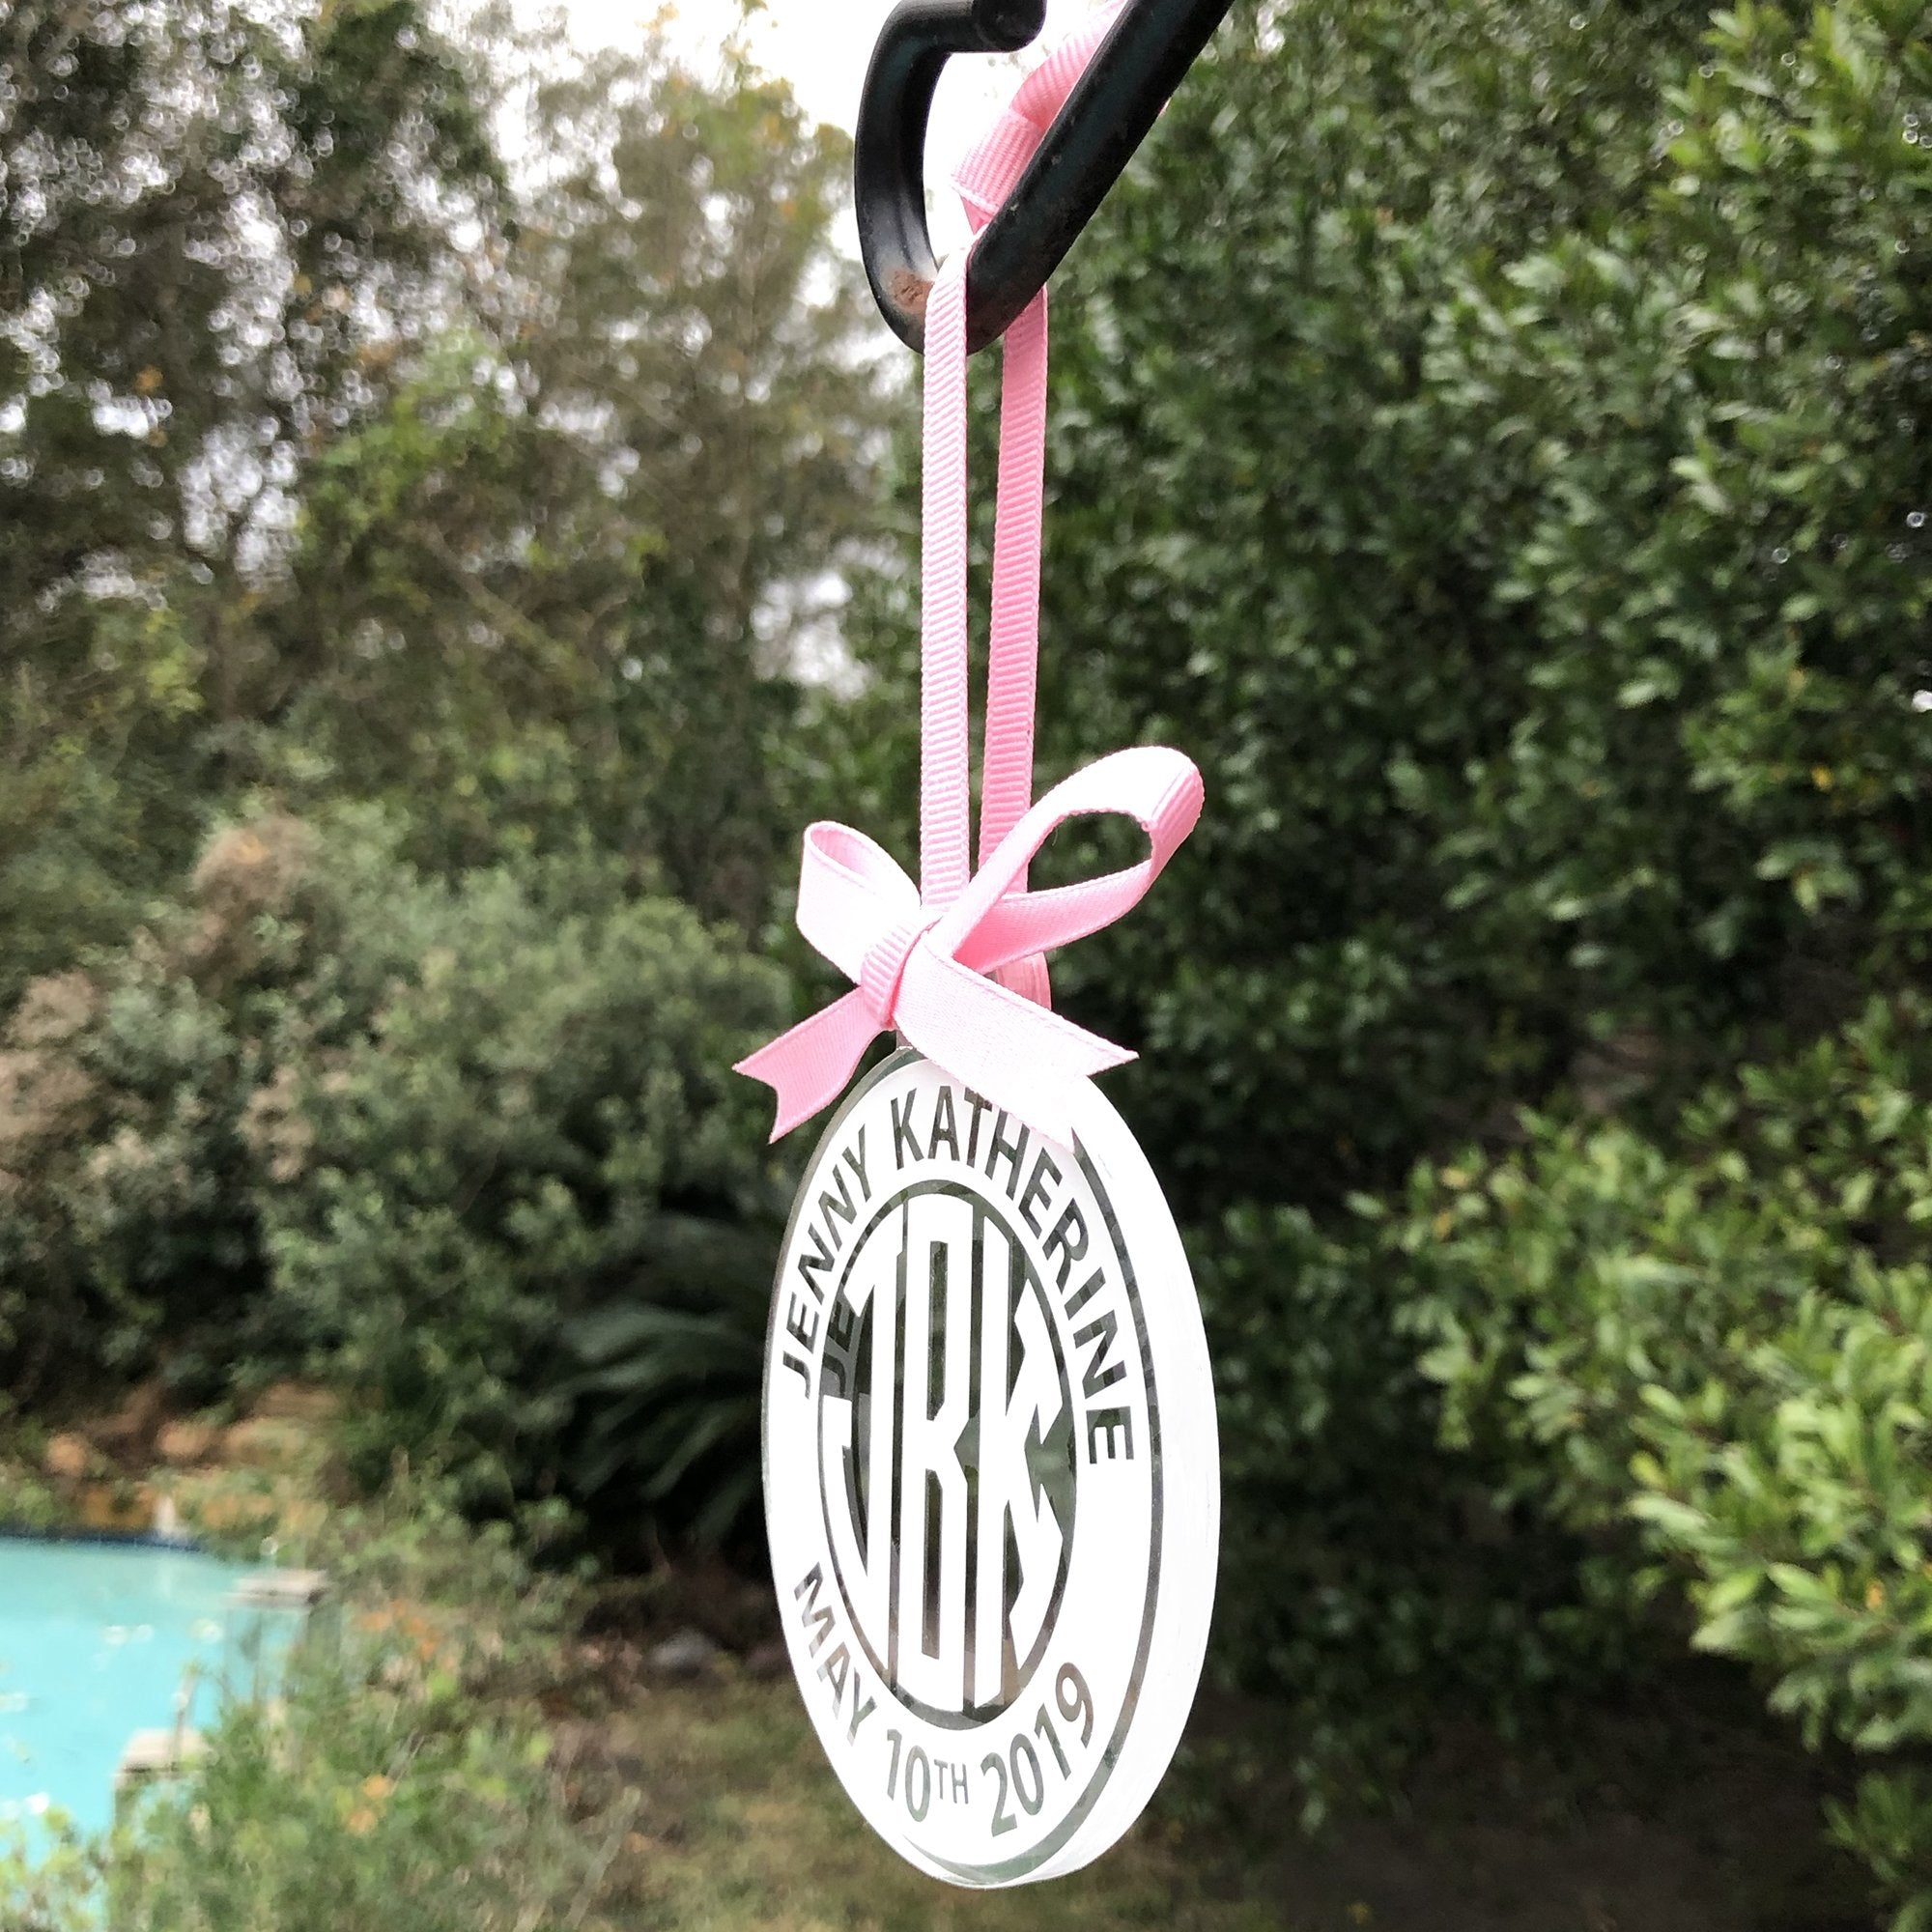 Baby Girl Ornament | Brit and Bee